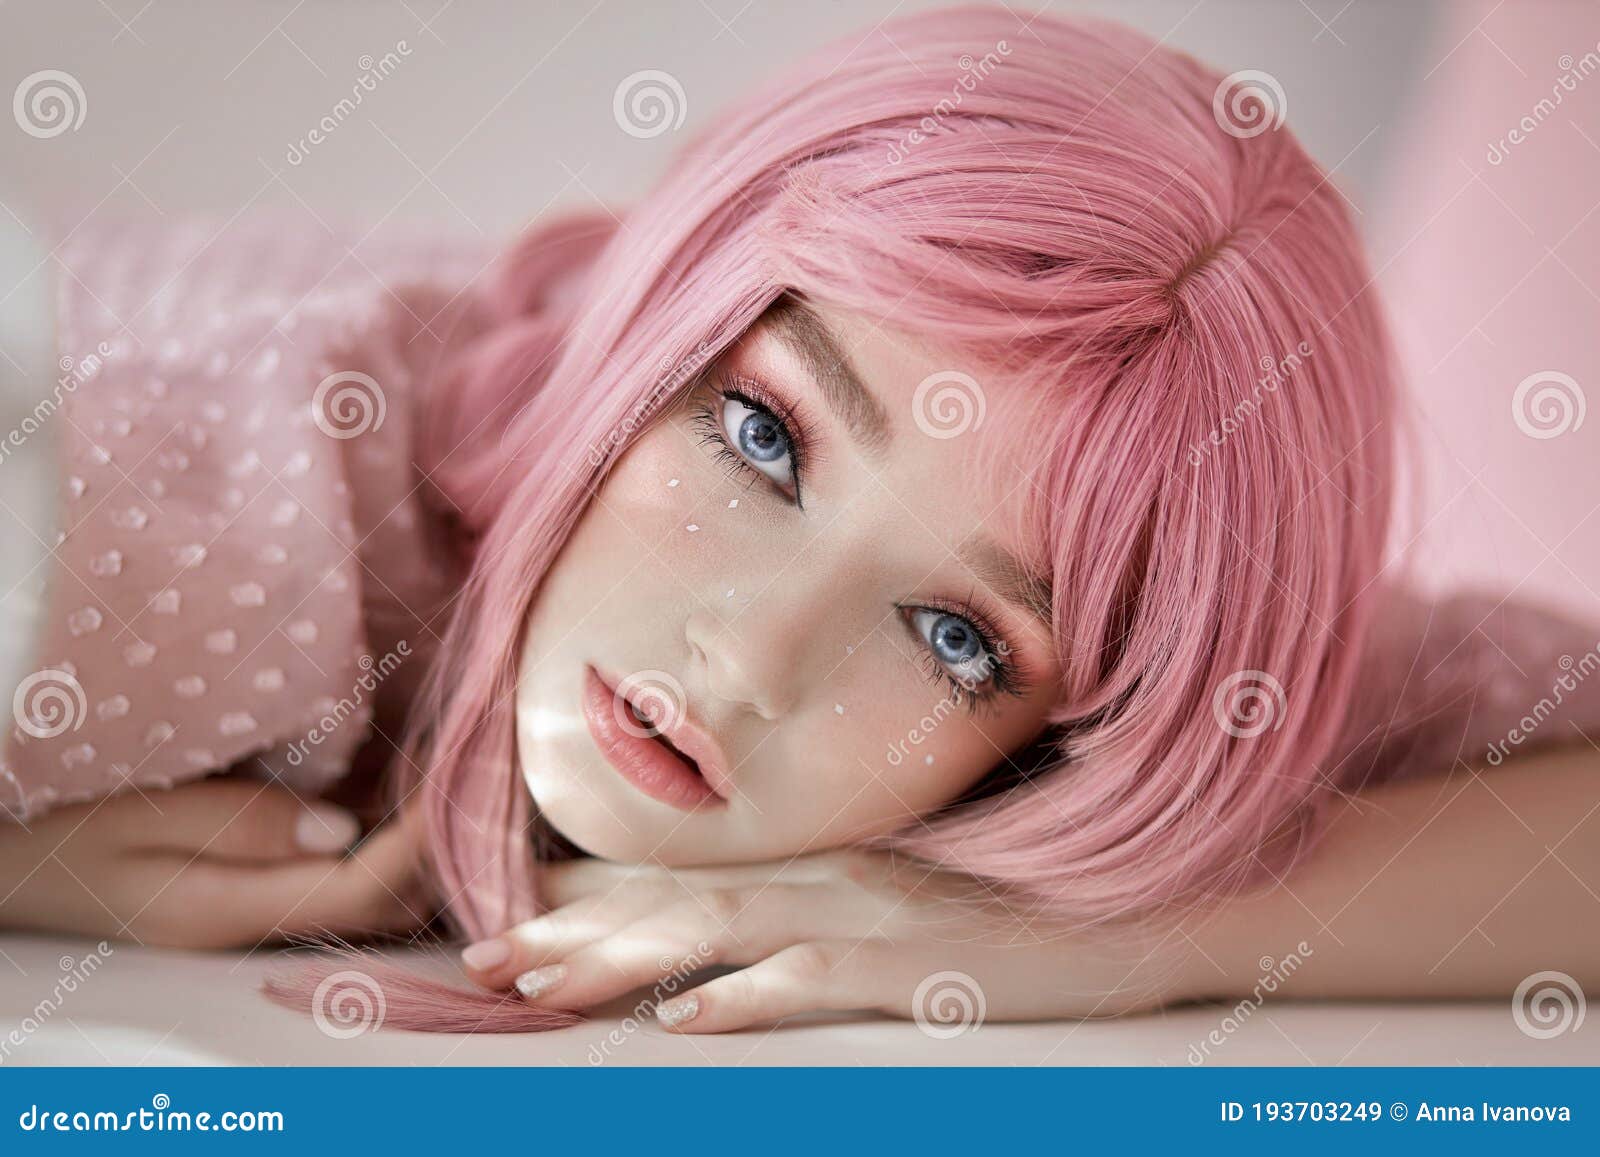 Portrait of a Young Woman with Pink Hair. Perfect Hairstyle and Hair  Coloring Stock Image - Image of background, hair: 193703249